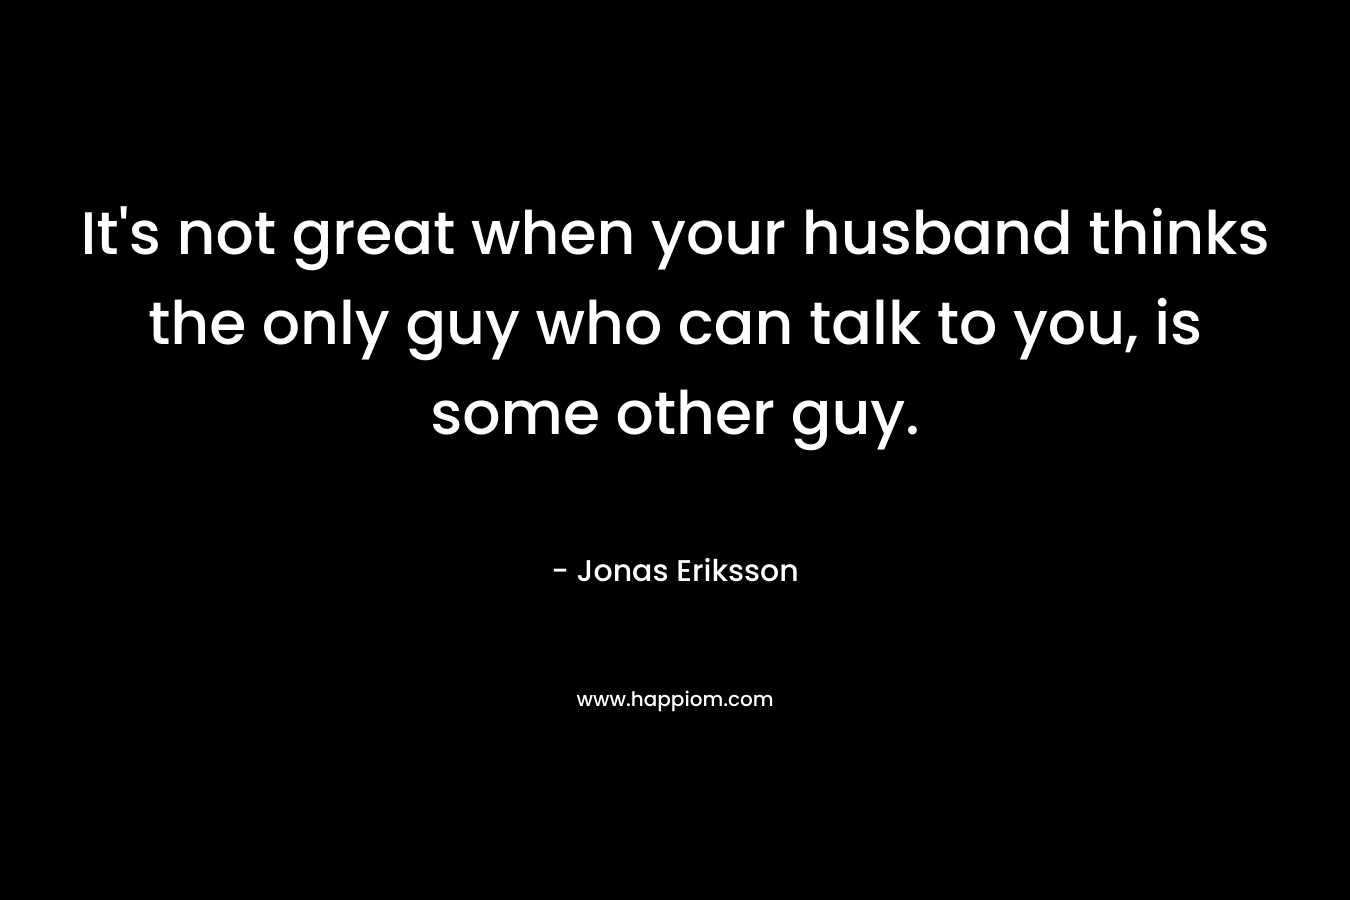 It's not great when your husband thinks the only guy who can talk to you, is some other guy.